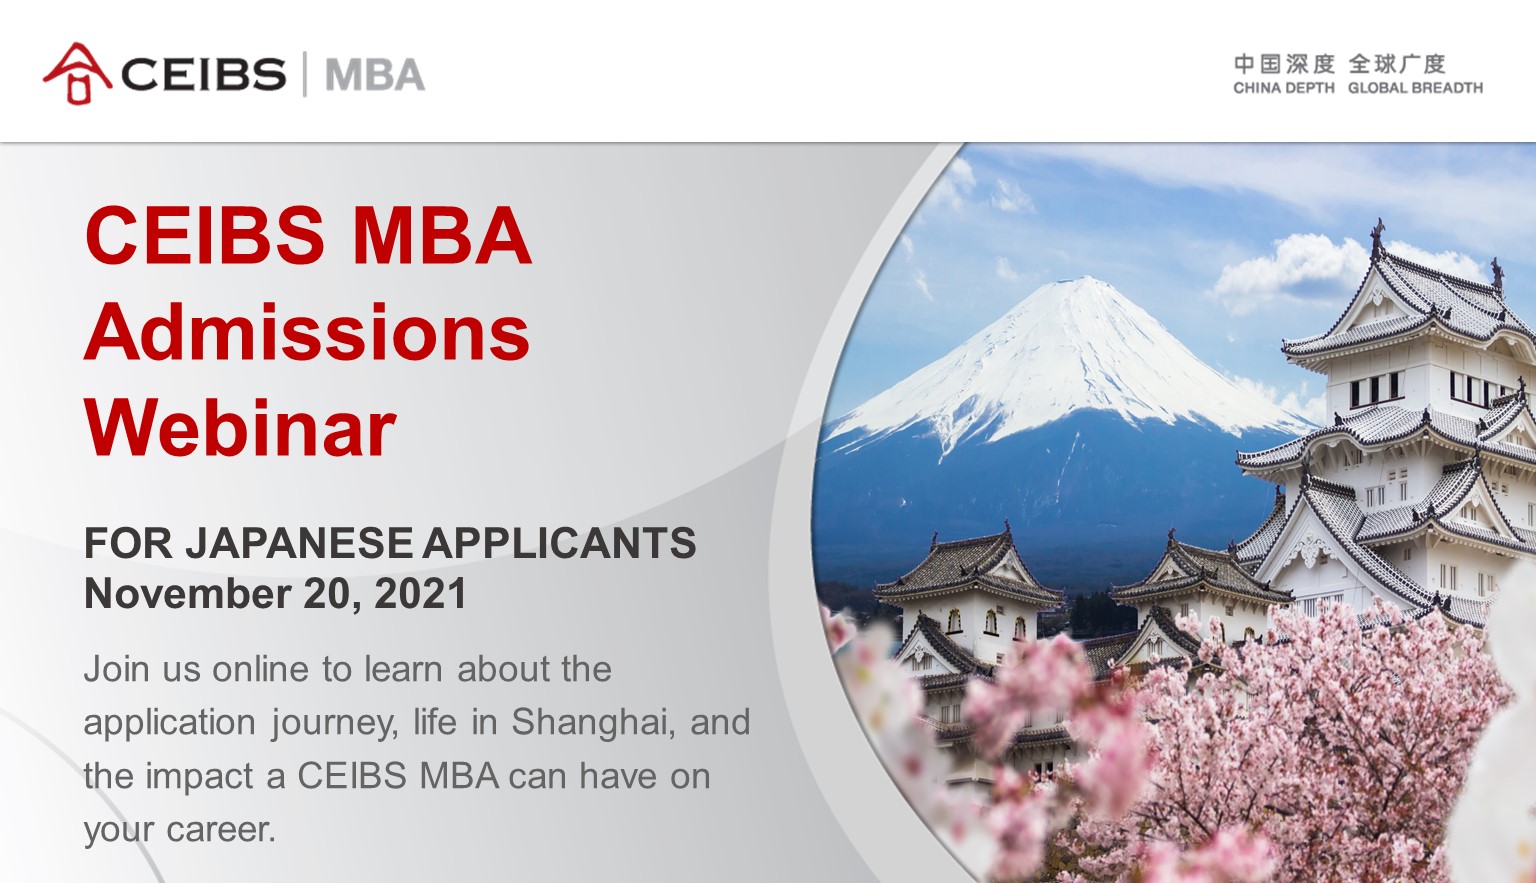 CEIBS MBA Admissions Webinar for Japanese Applicants